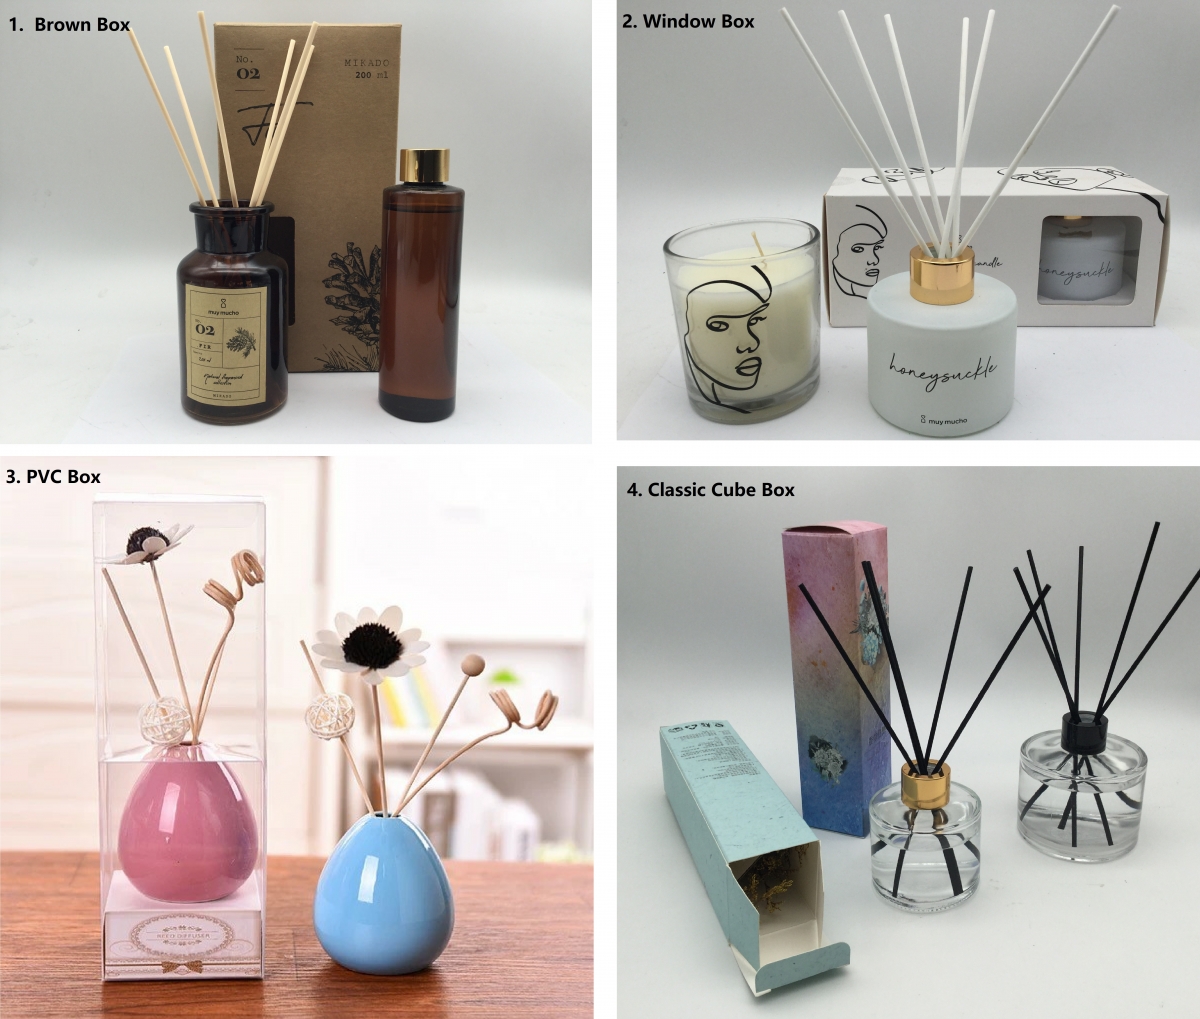 Aroma Diffuser ：Ceramic Art , Flower , Butterfly , Gift Set , Sculpture Craft ,China Factory ,Best Price-HOWCANDLE-Candles,Scented Candles,Aromatherapy Candles,Soy Candles,Vegan Candles,Jar Candles,Pillar Candles,Candle Gift Sets,Essential Oils,Reed Diffuser,Candle Holder,